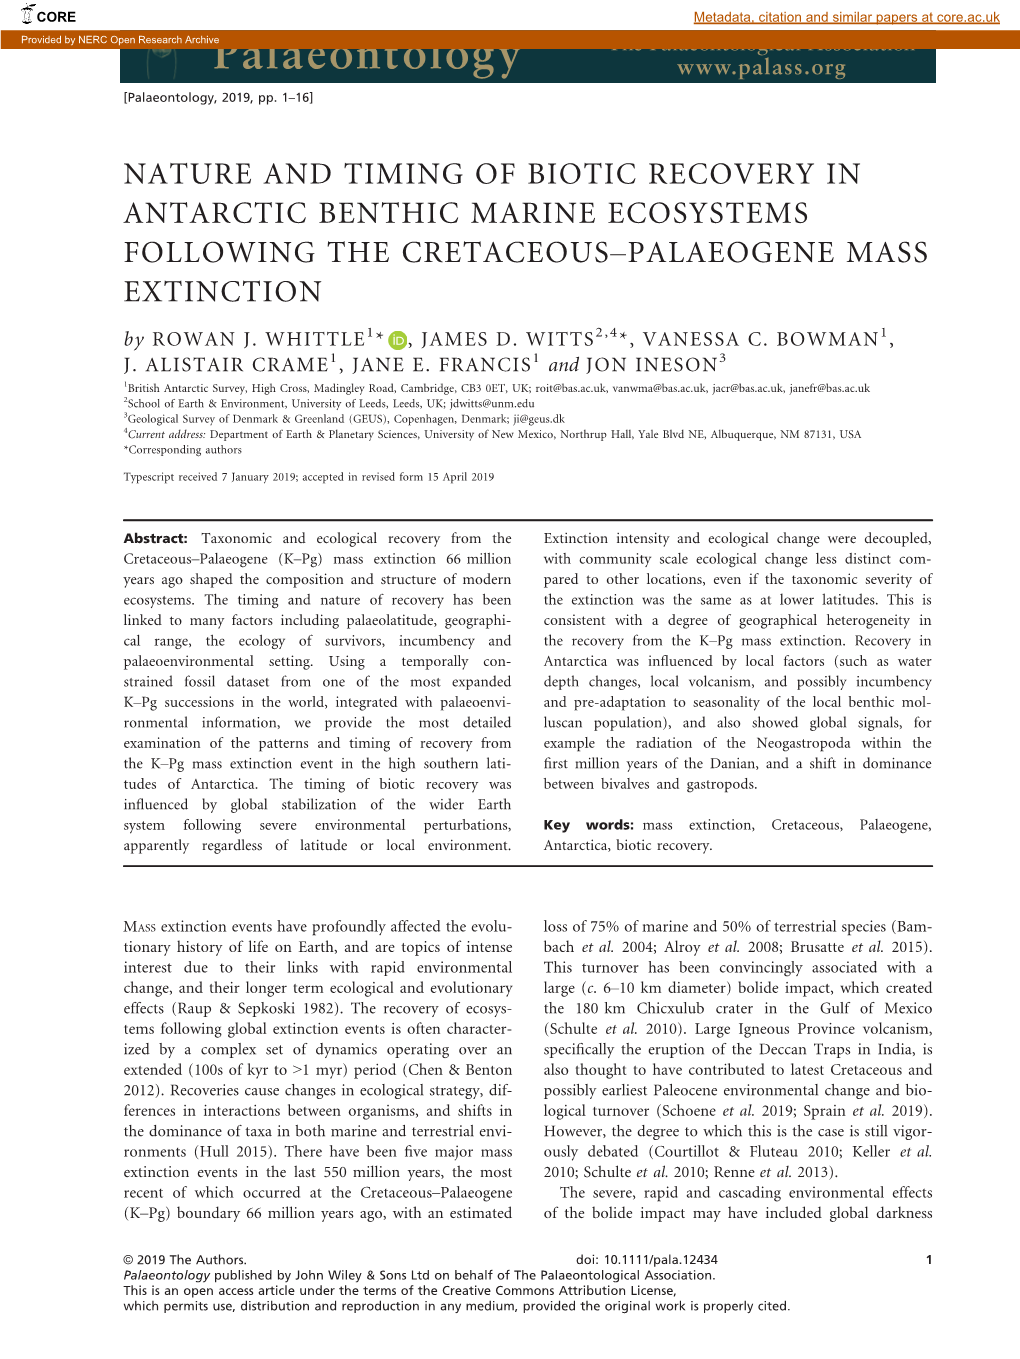 Nature and Timing of Biotic Recovery in Antarctic Benthic Marine Ecosystems Following the Cretaceous–Palaeogene Mass Extinction